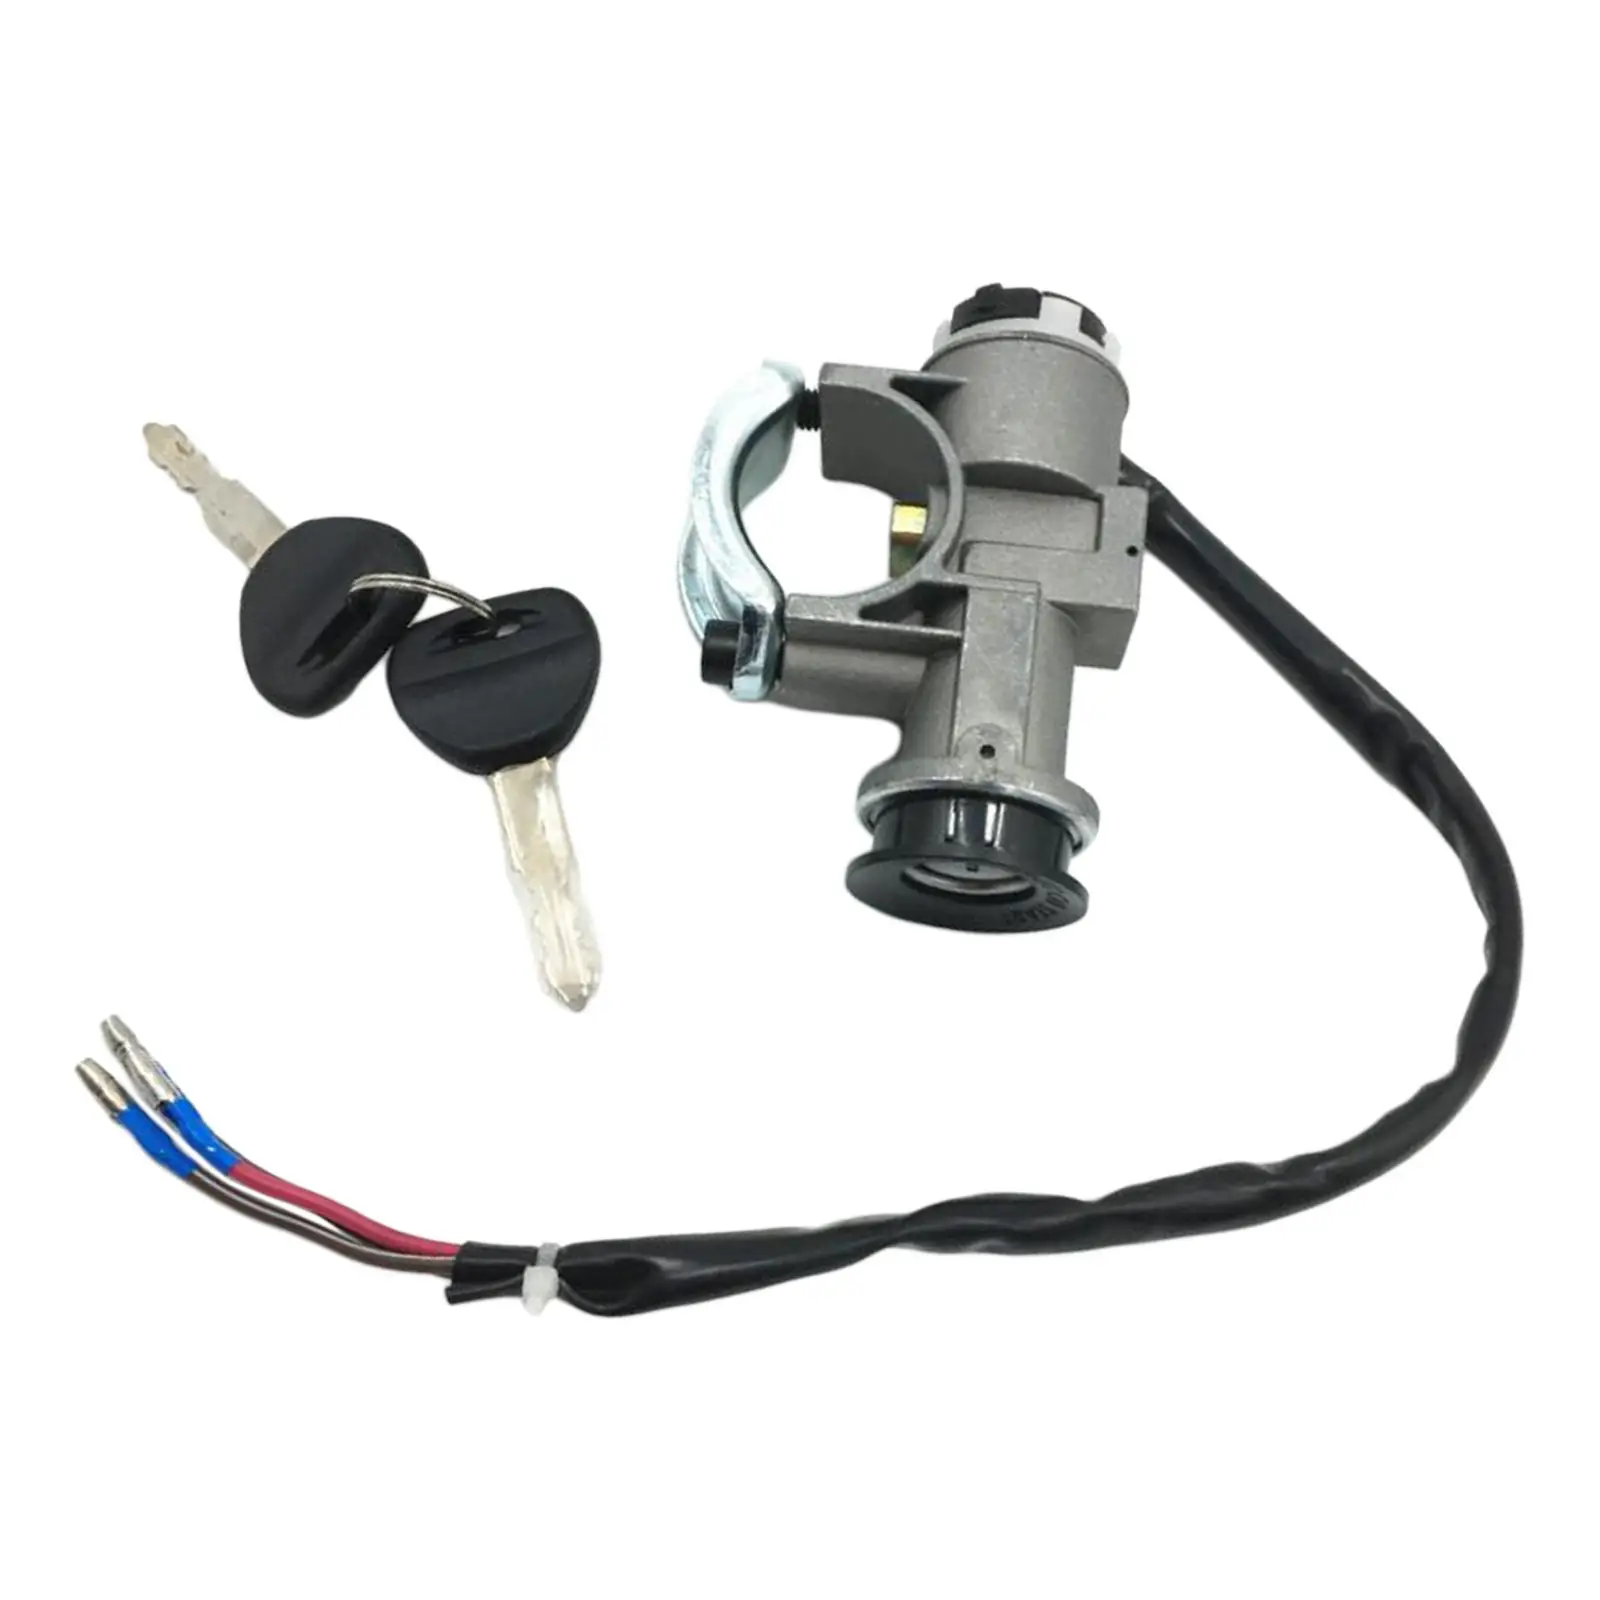 Motorcycle Ignition Switch with Keys Replacement Parts Key Locking Starter Switch 3 Wires Ignition Switch for HS800 800cc